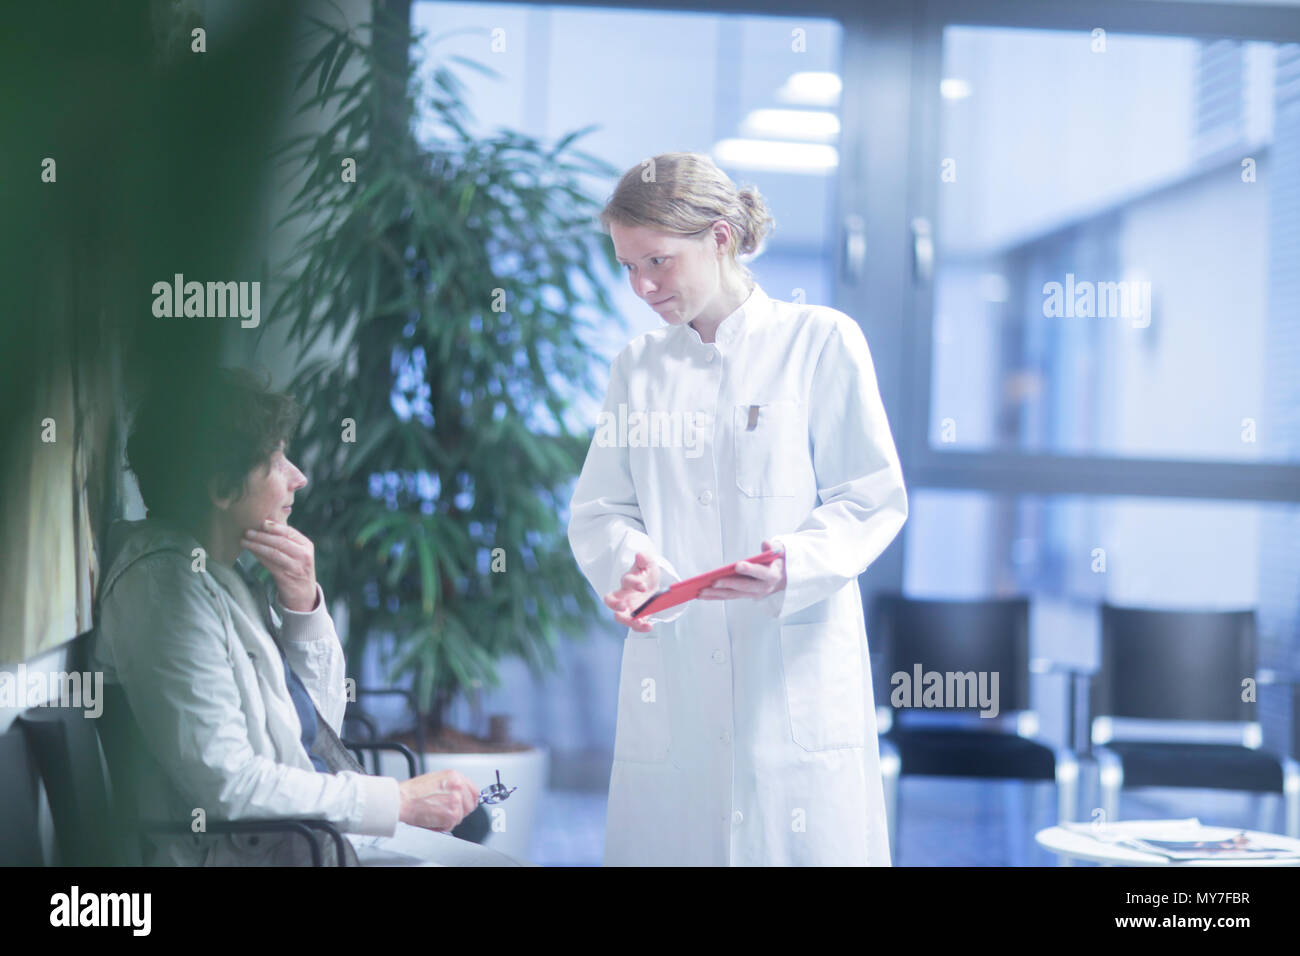 Radiologist, holding digital tablet, talking to mature woman in waiting area of hospital Stock Photo